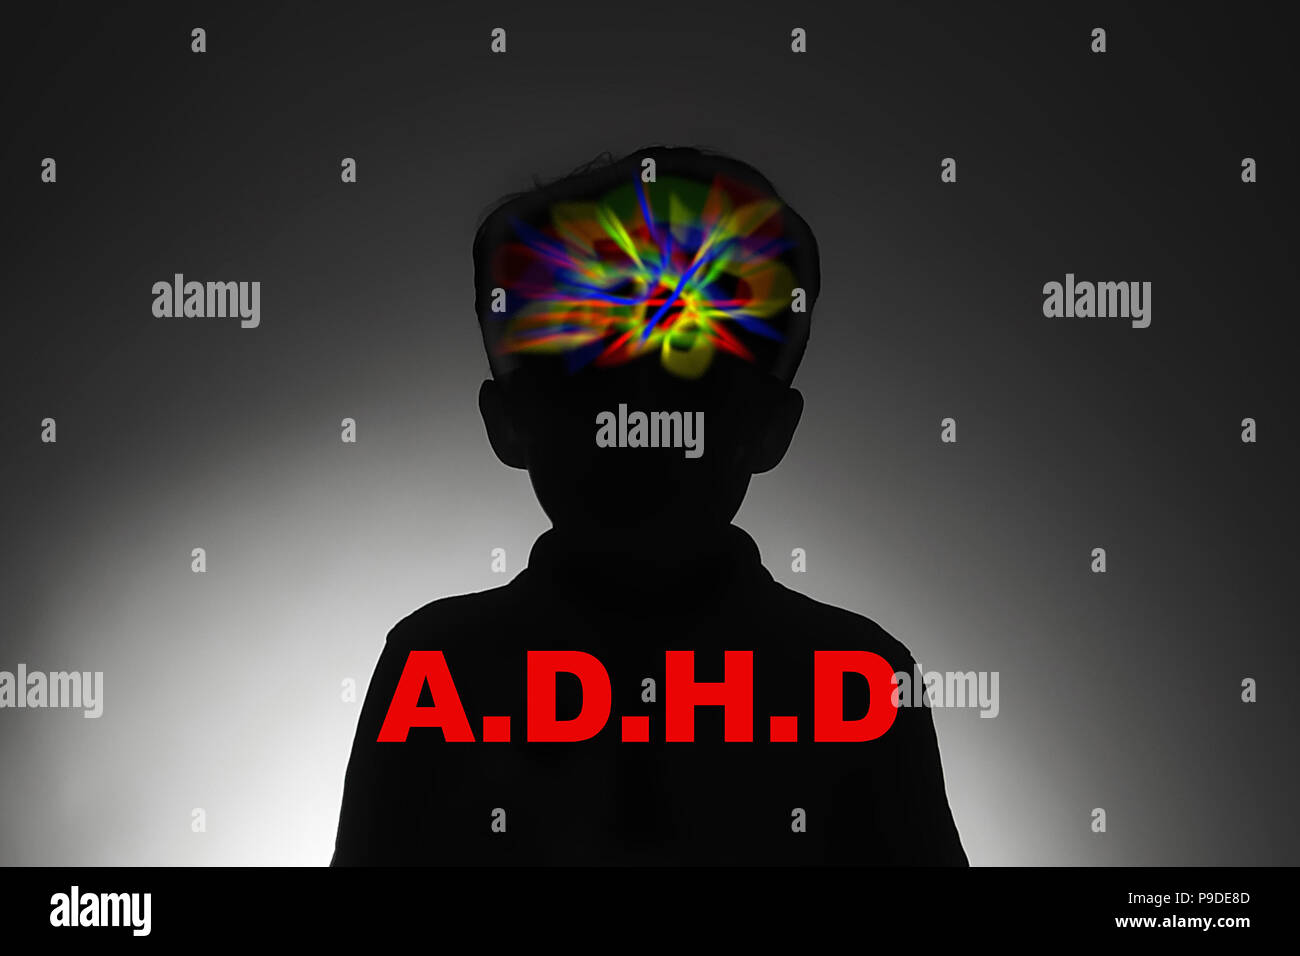 attention deficit hyperactivity disorder Stock Photo